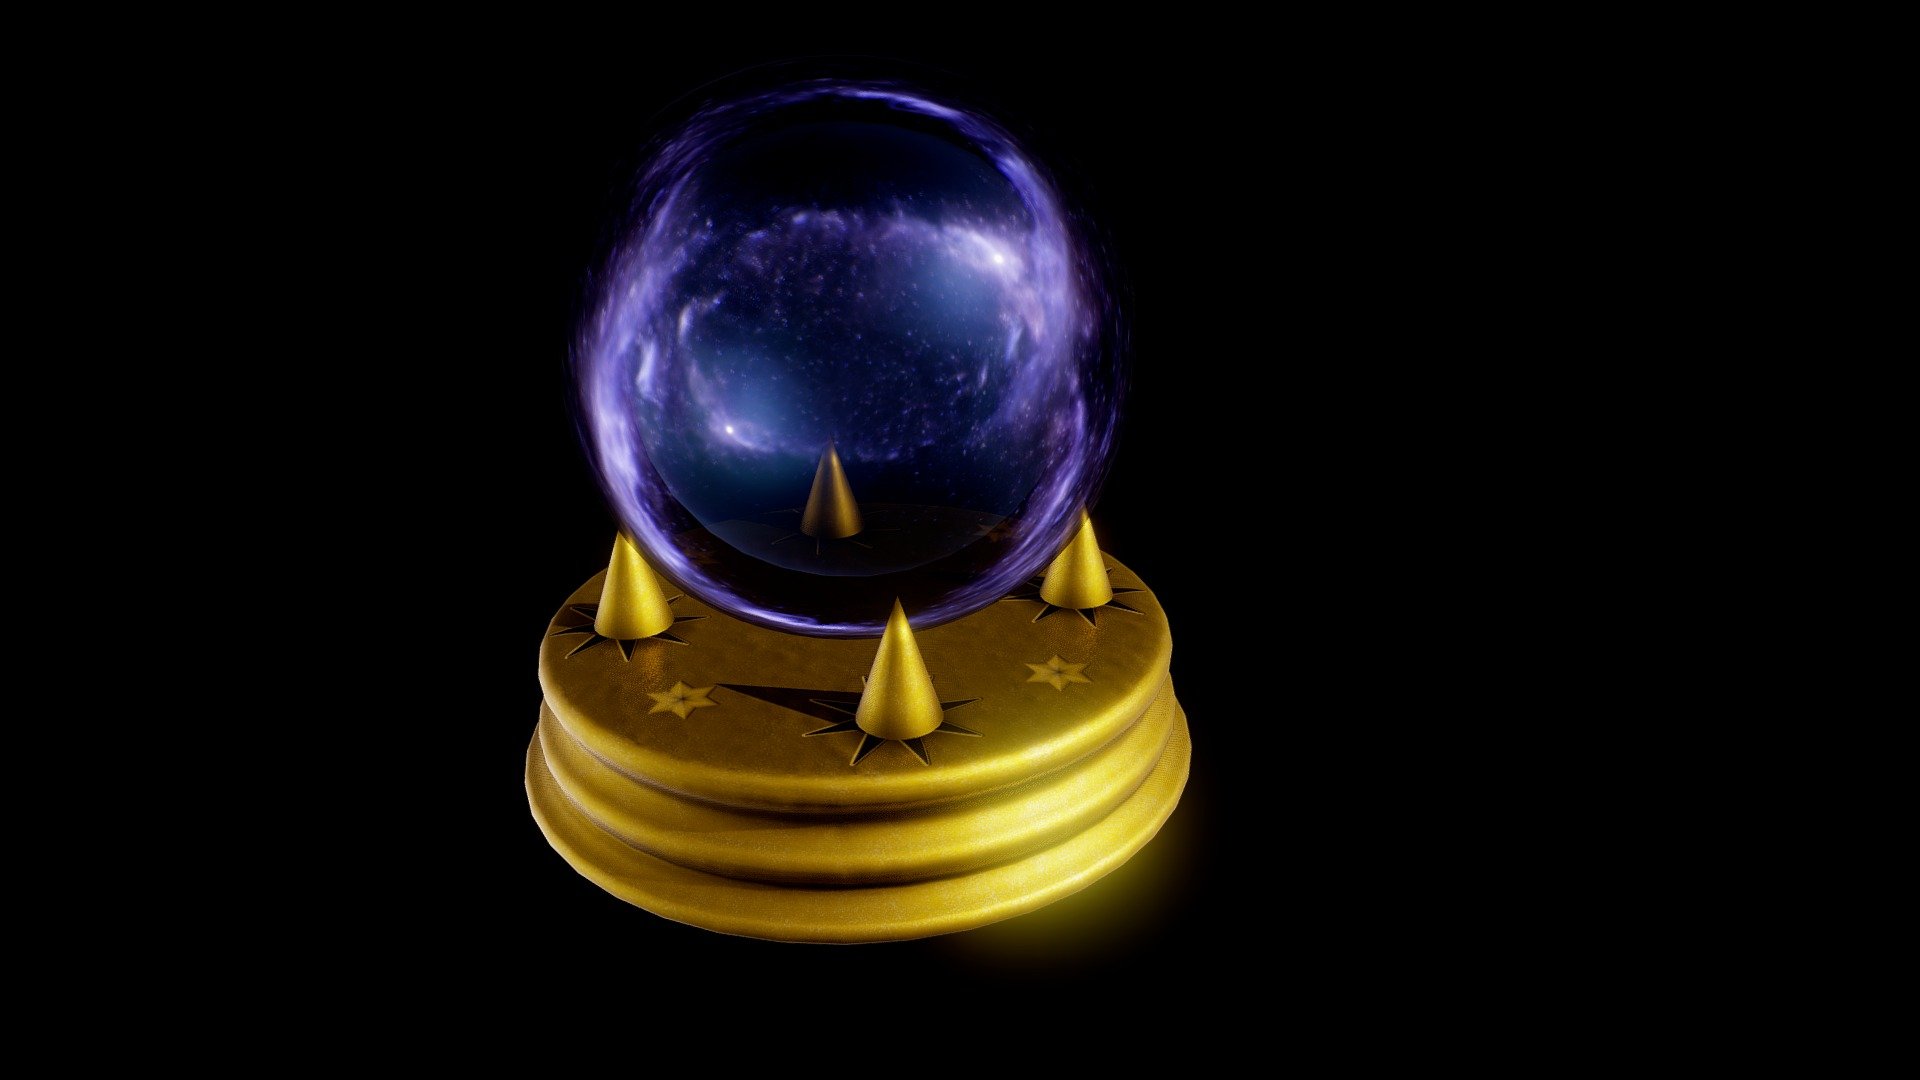 Hi everyone, I wanted to do a fun little practice project and thought a crystal ball would be a good experiment. I modeled and animated this in Maya and textured it in Substance Painter. 
As always, feedback and critique are always welcome 3d model